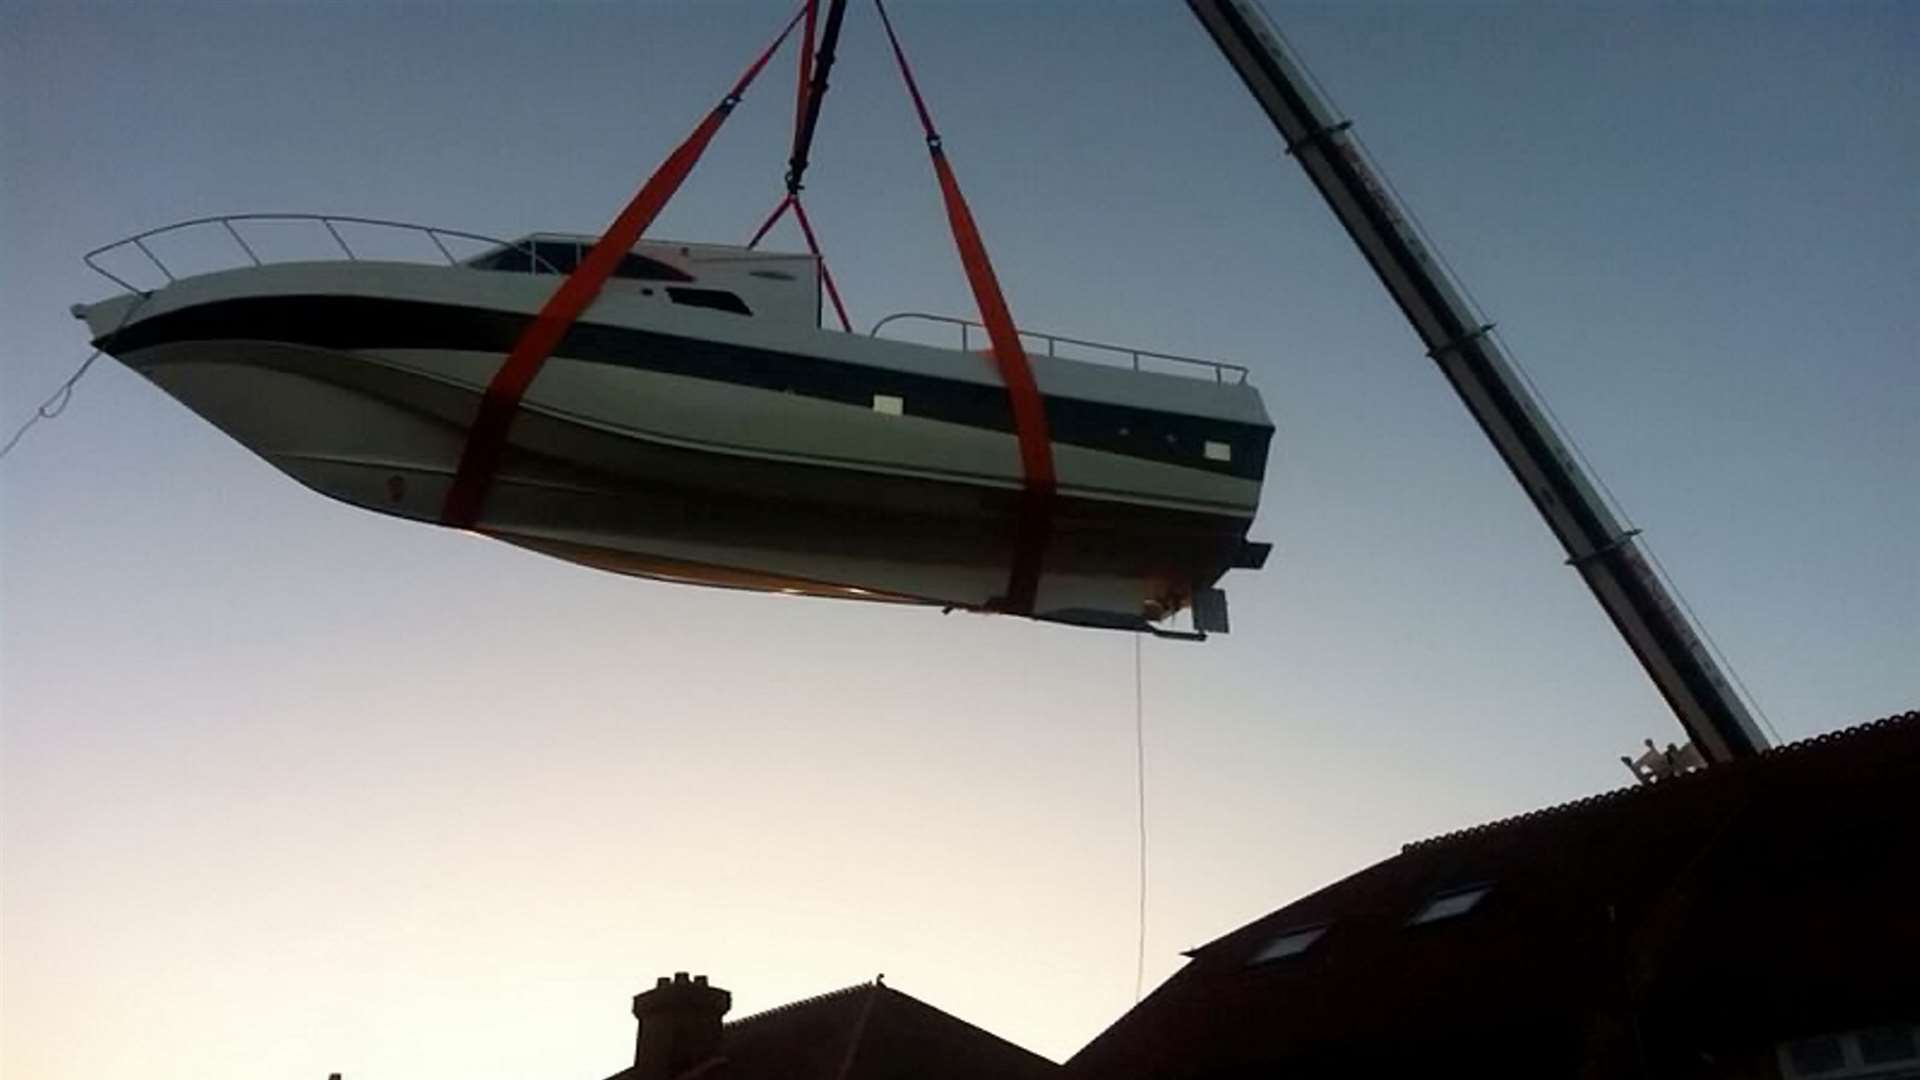 The yacht had to be lifted over the house by crane. Picture: SWNS